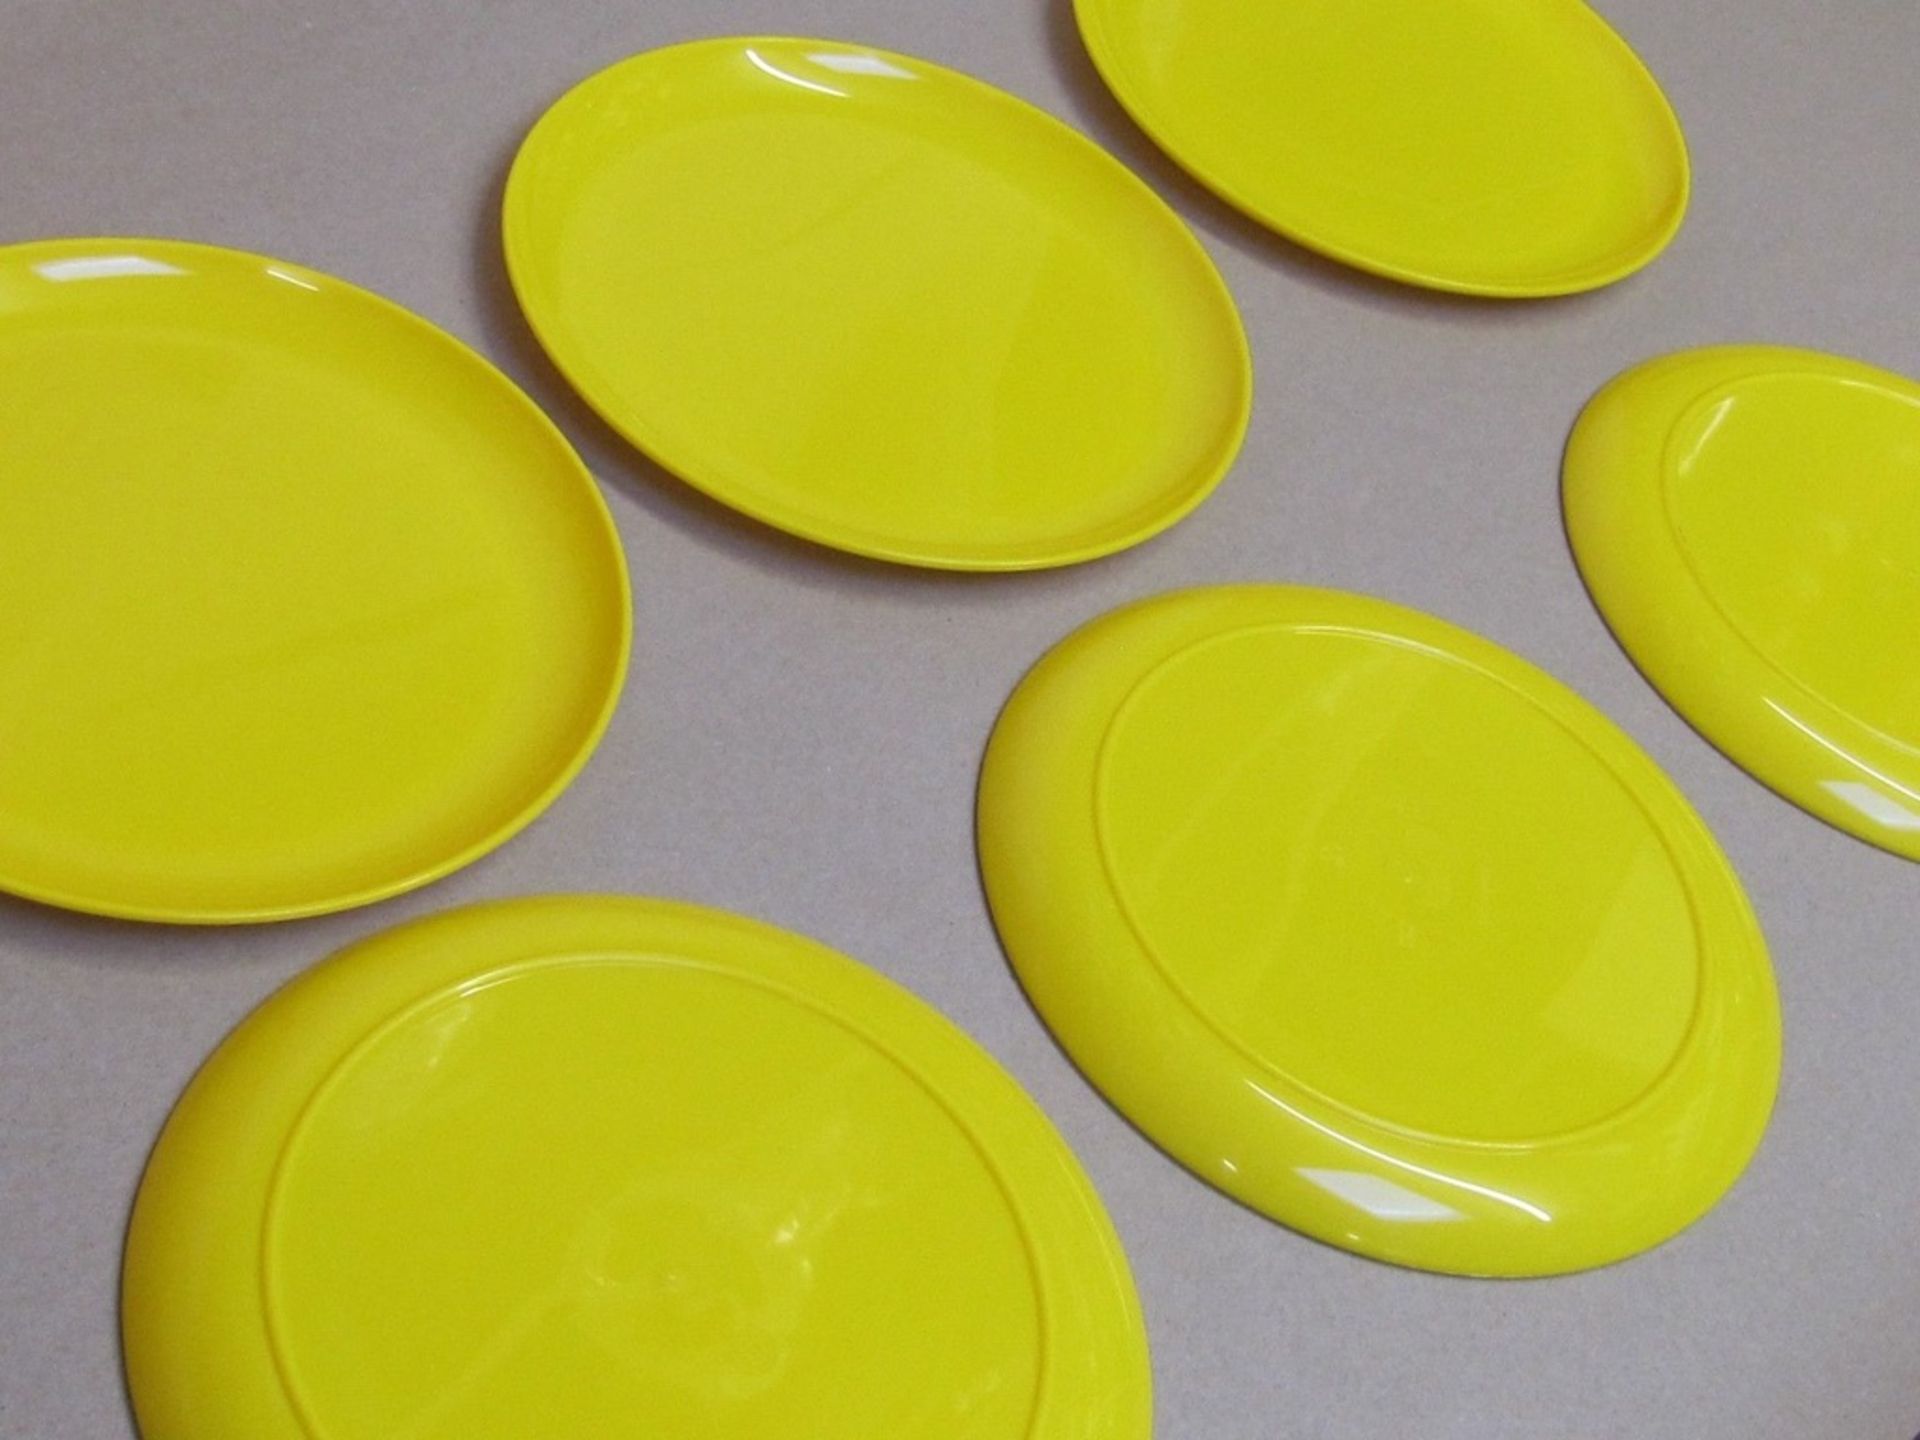 30 x Kinderzeug Unbreakable Baby Plate. Dish washer & Microwave safe. no vat on hammer.You will